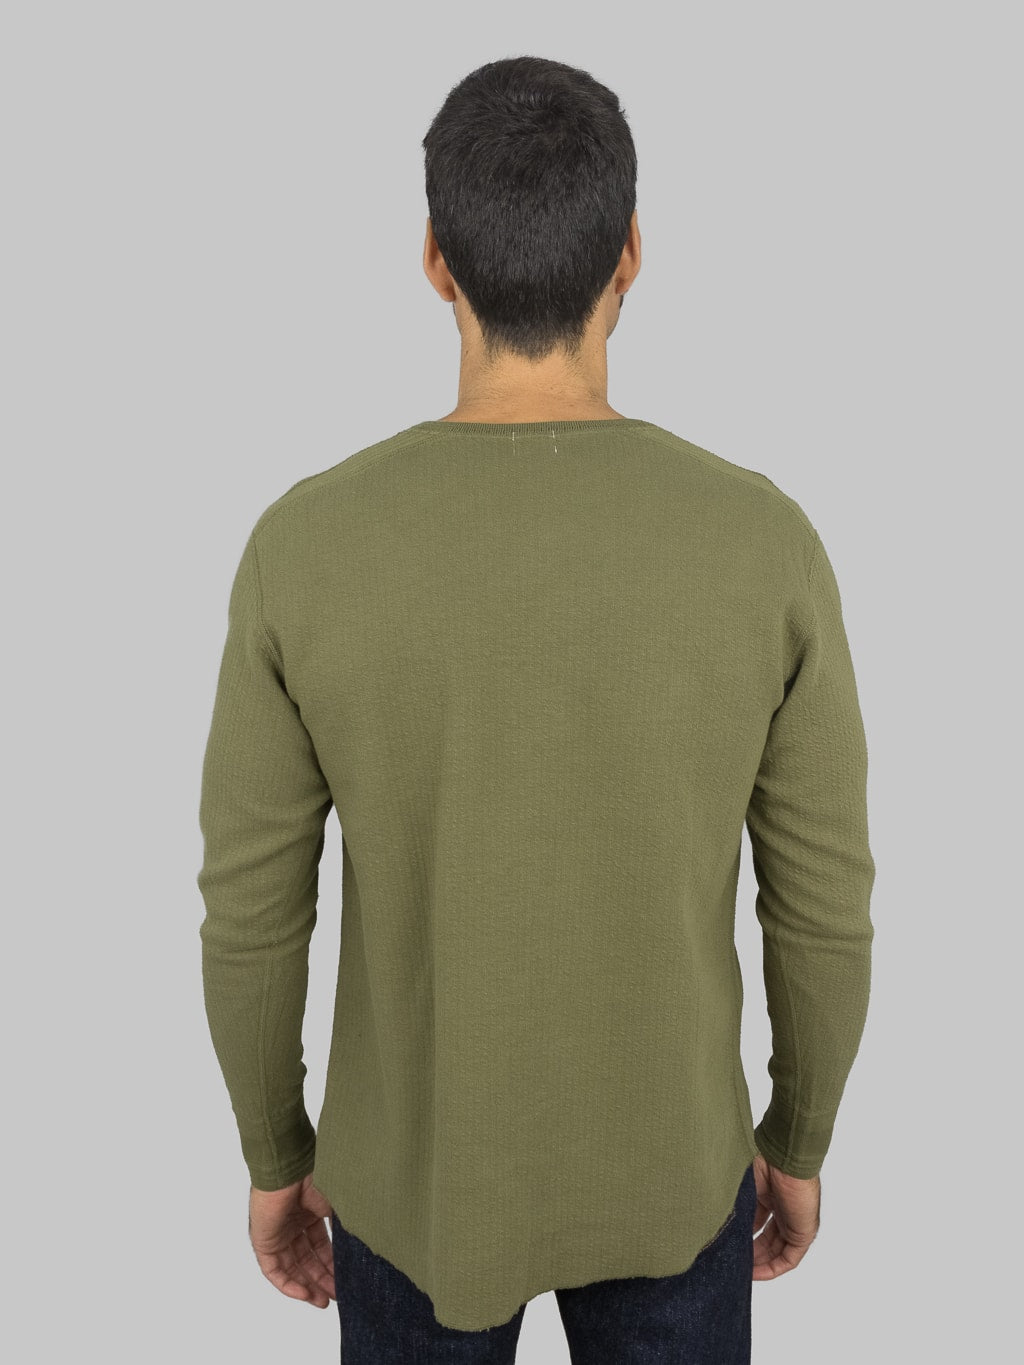 Loop Weft Double Face Jacquard crewneck Thermal army olive model black fit